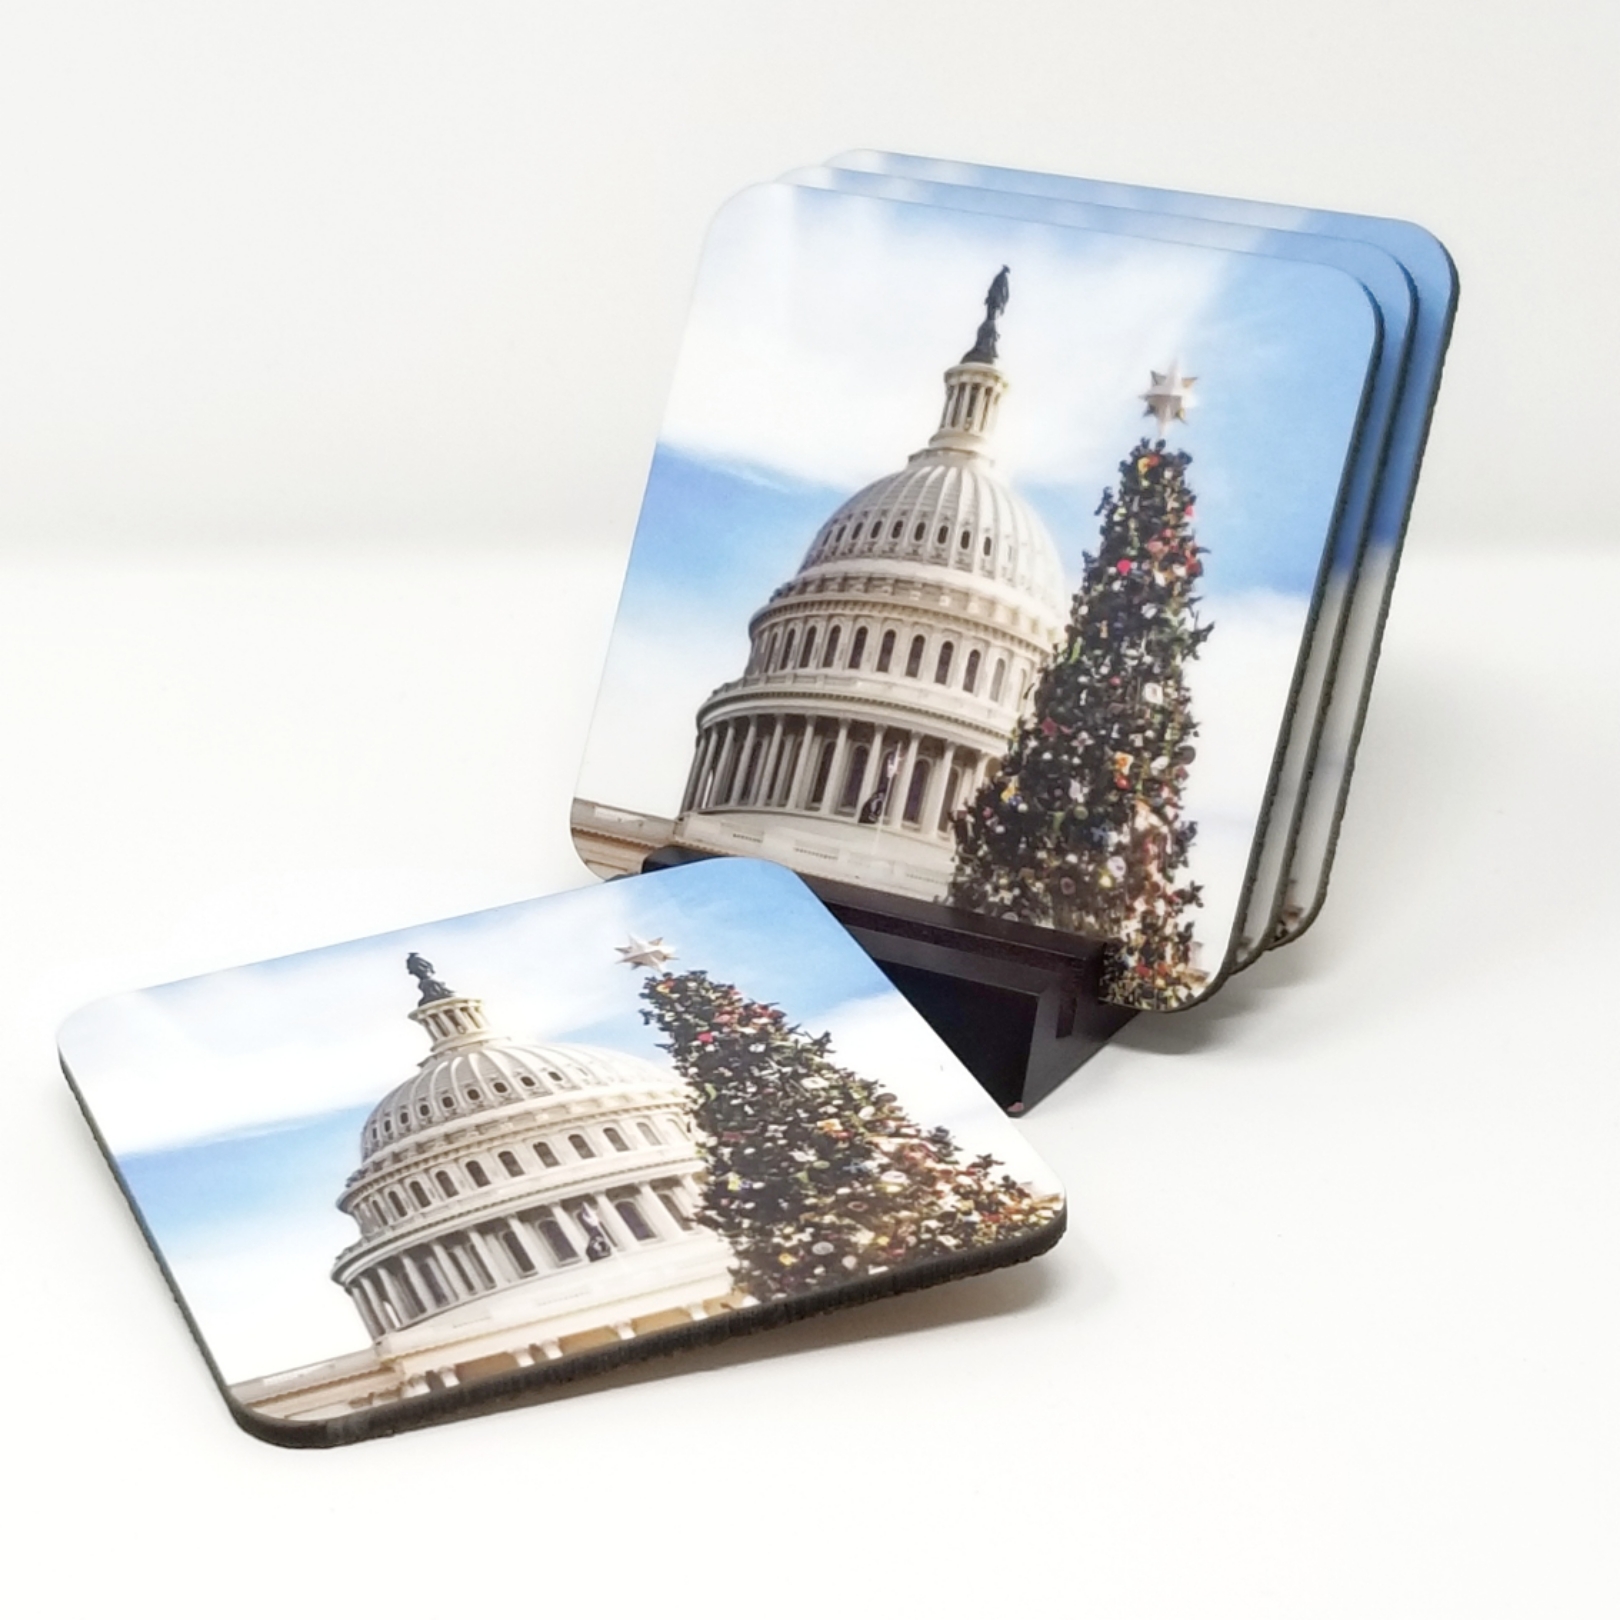 US Capitol Christmas Tree 2019 made with sublimation printing